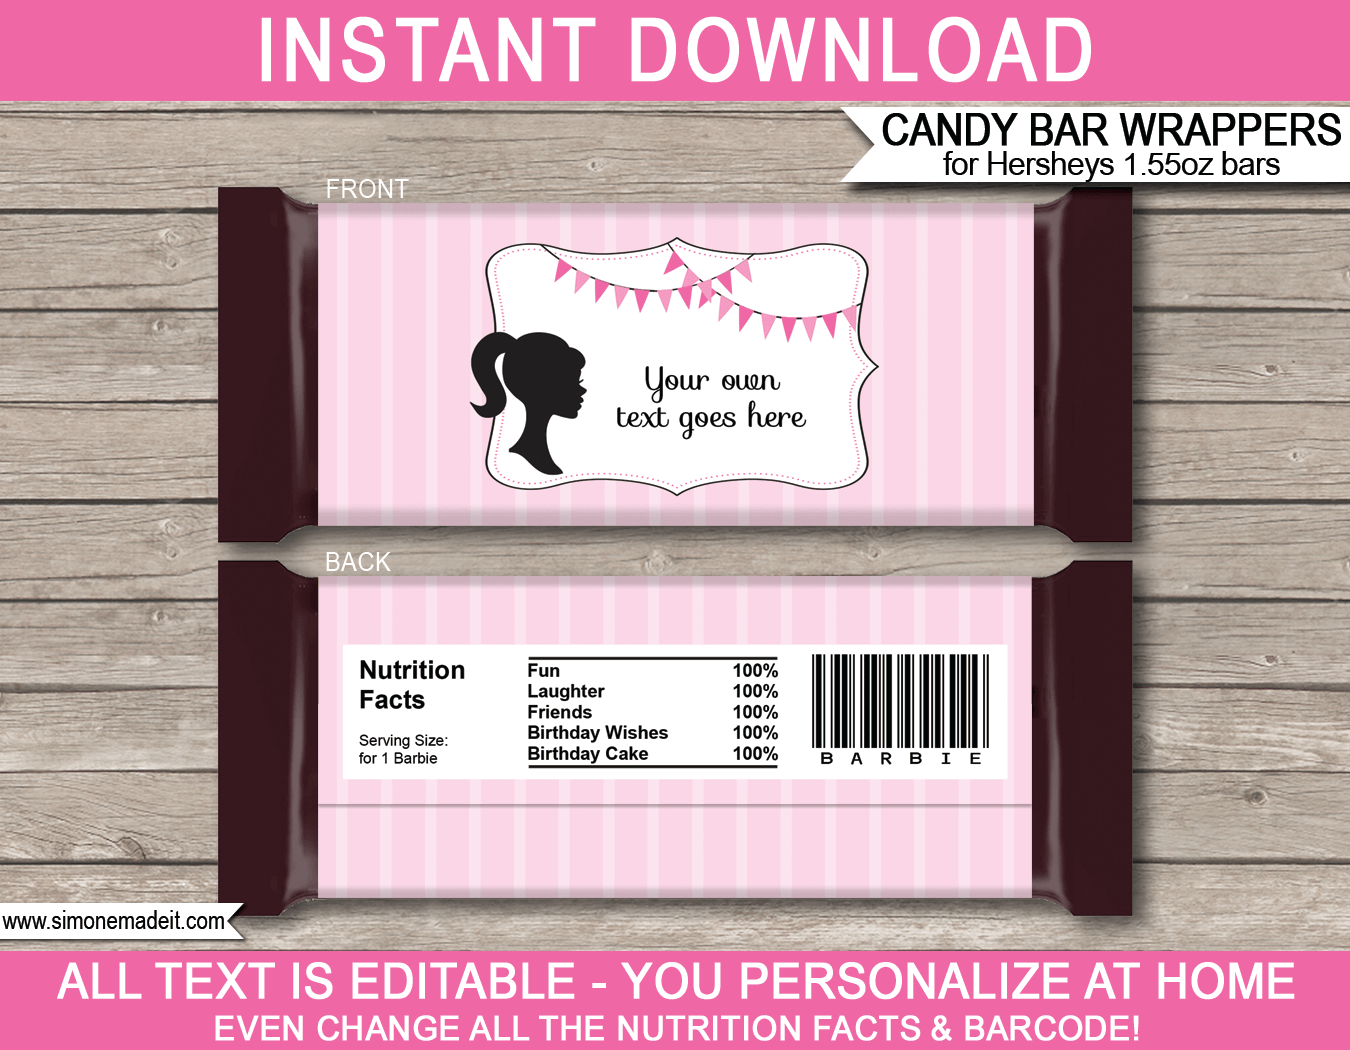 Barbie Hershey Candy Bar Wrappers | Birthday Party Favors | Personalized Candy Bars | Editable Template | INSTANT DOWNLOAD $3.00 via simonemadeit.com